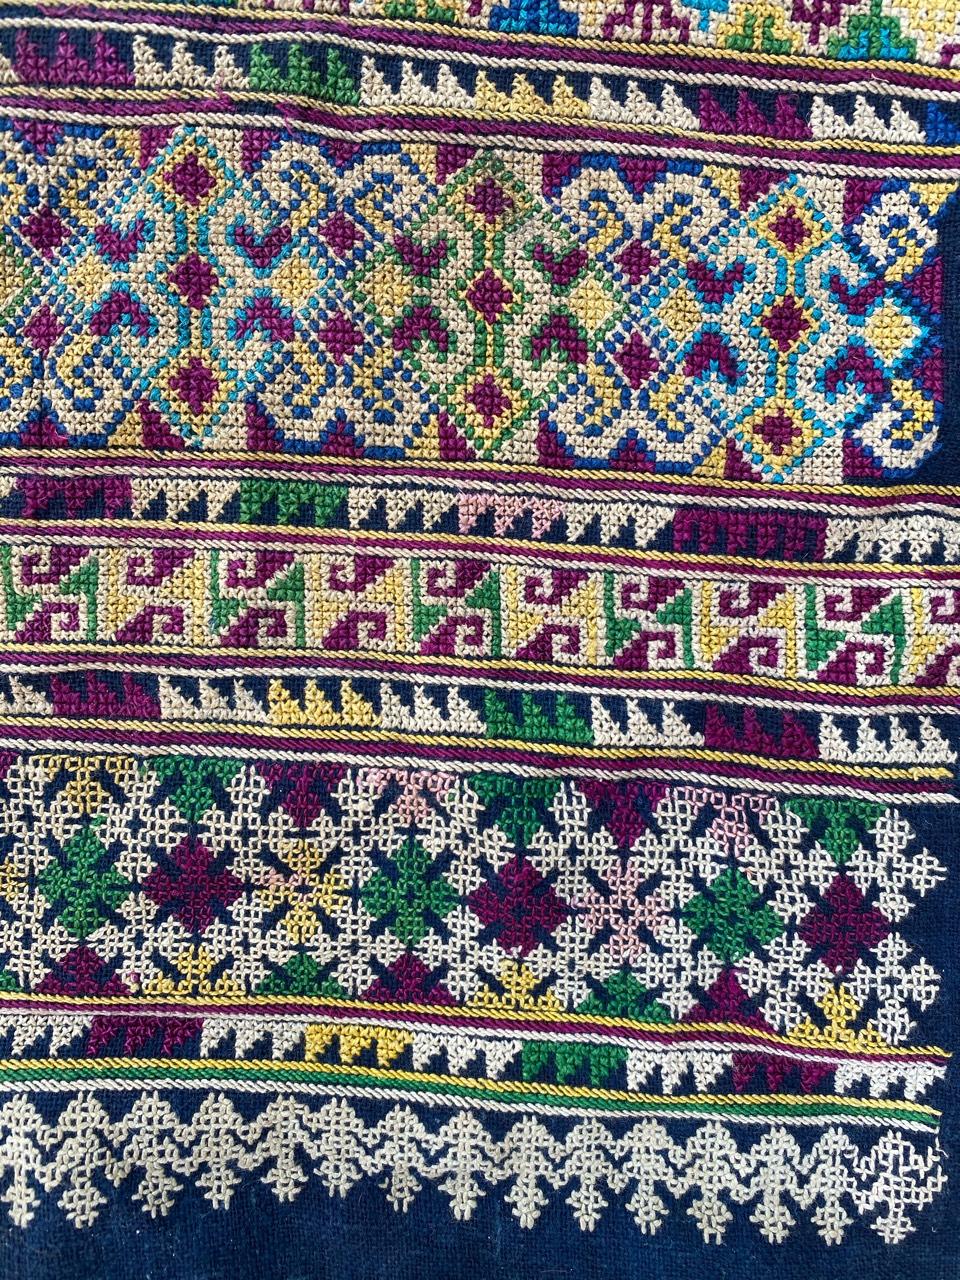 Very nice early 20th century embroidery with a tribal design and beautiful colors, entirely hand embroidered with silk on cotton.